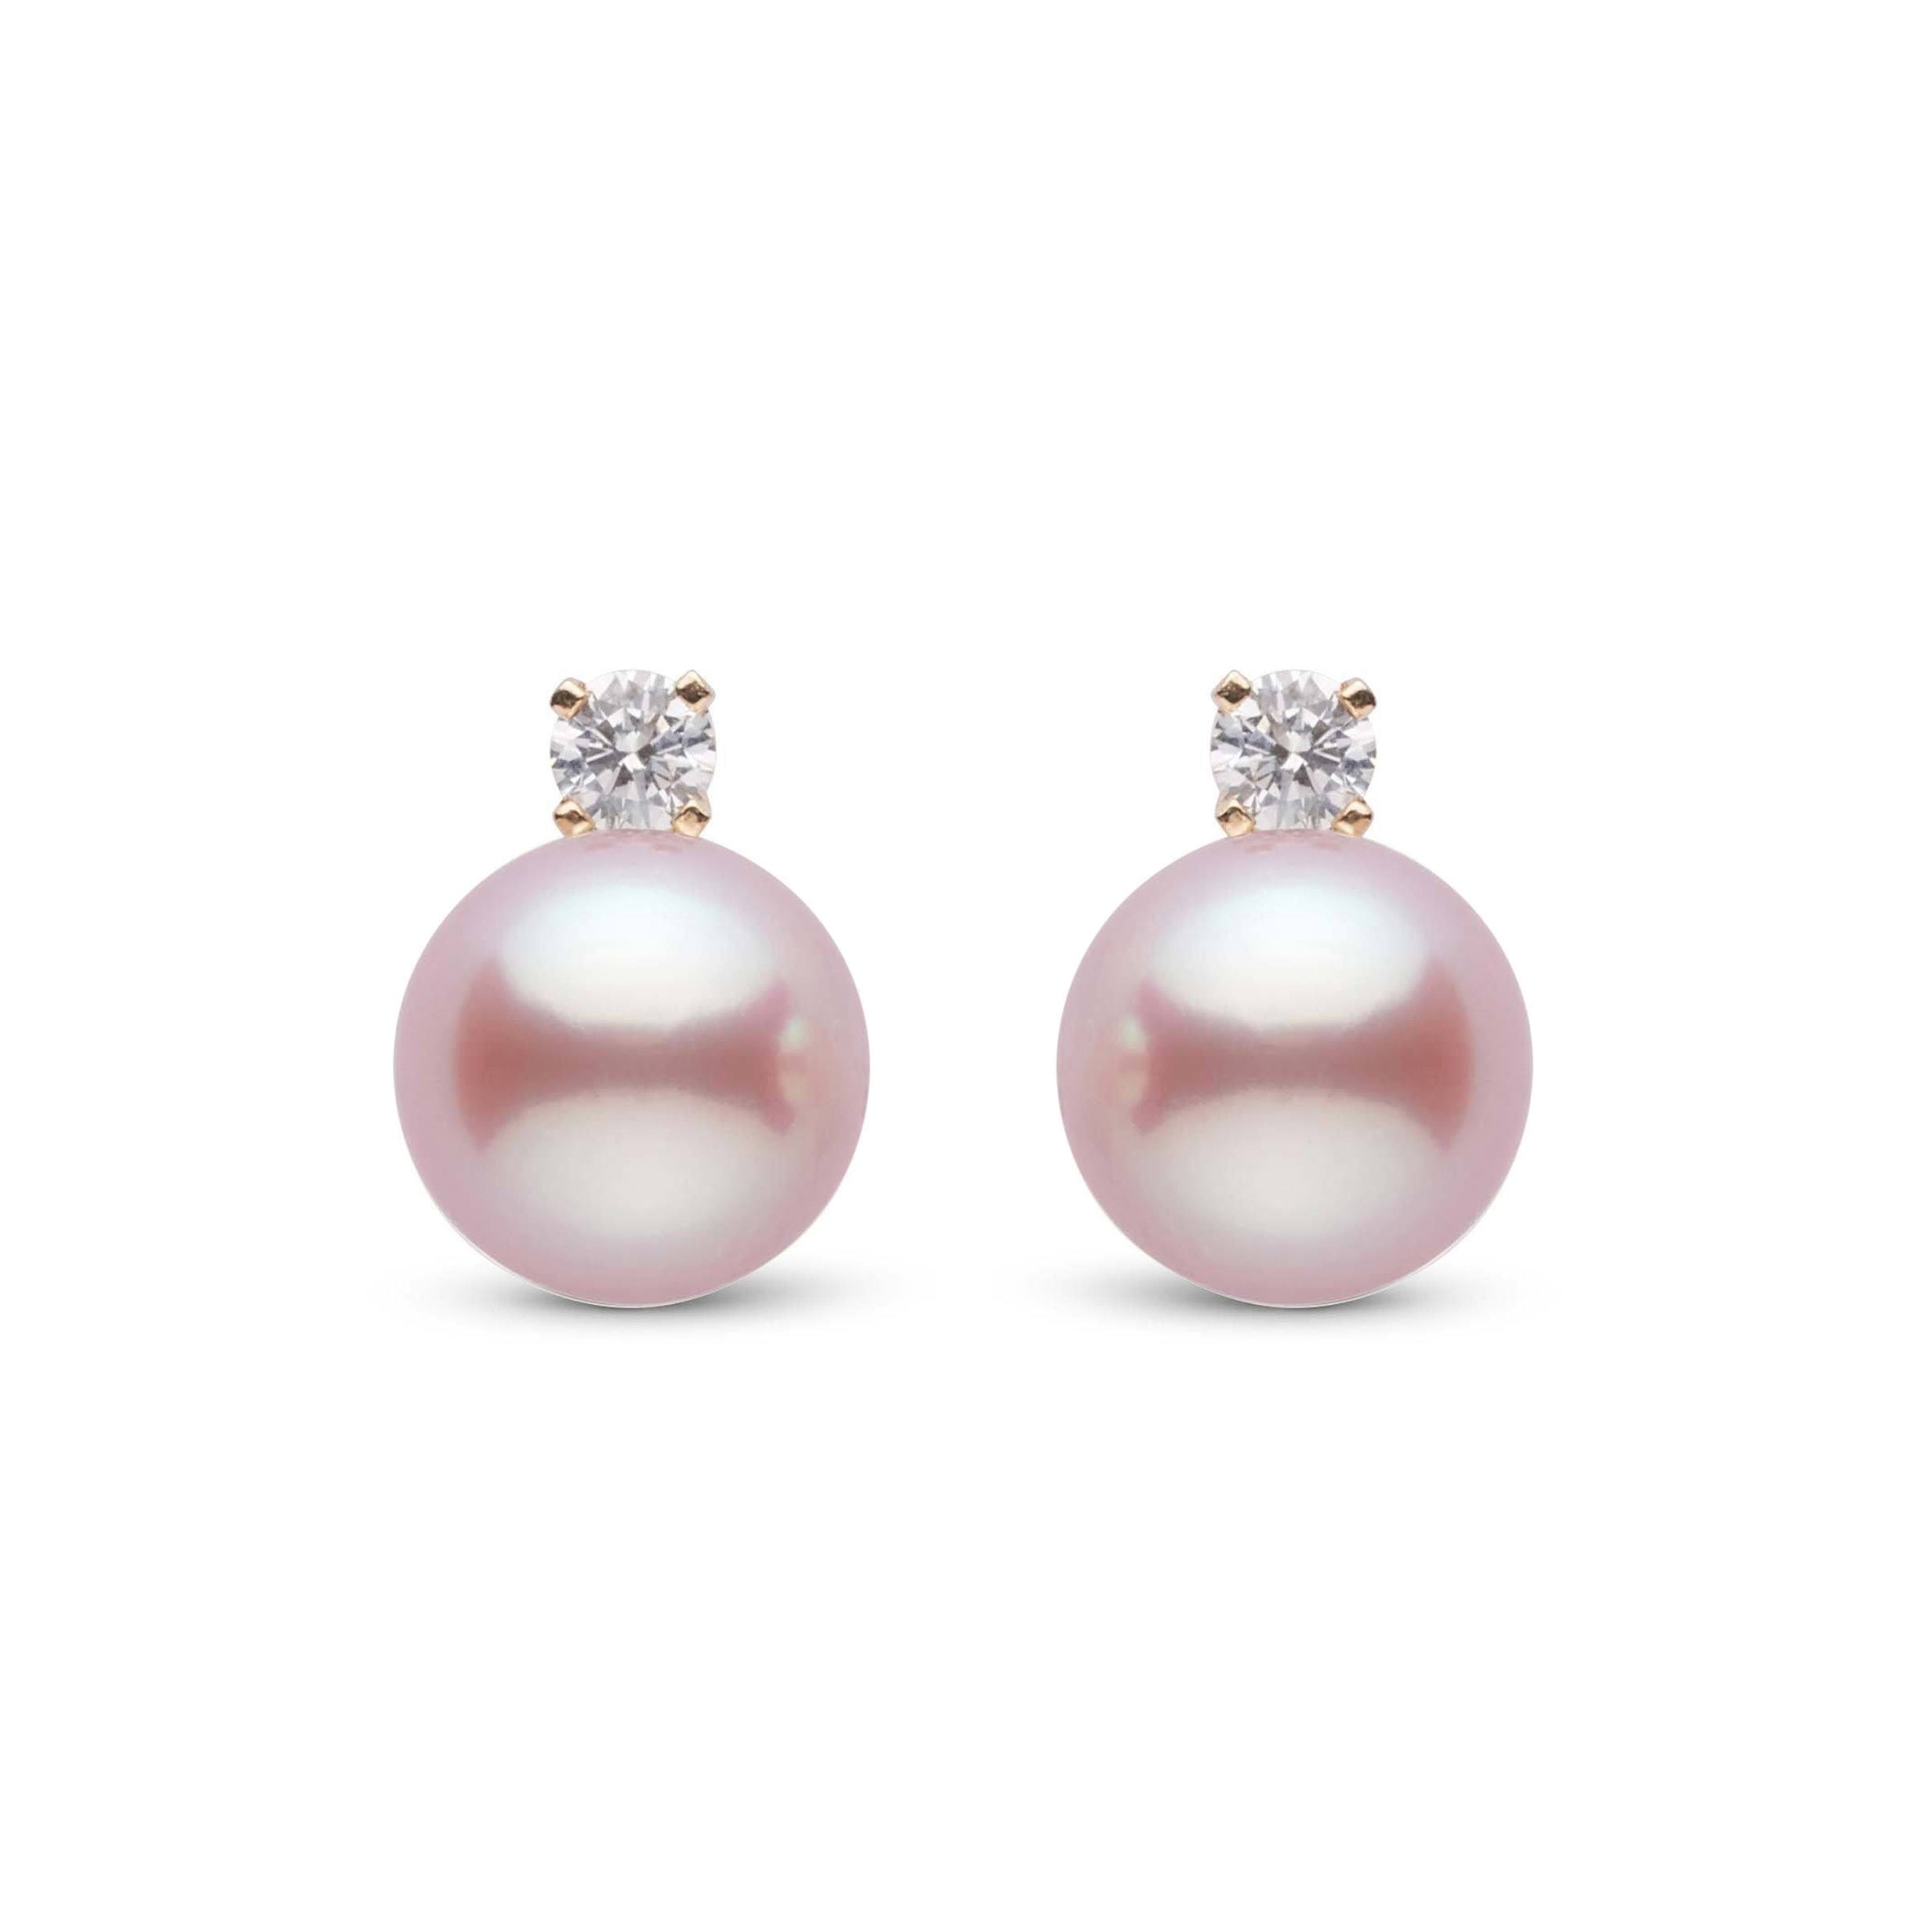 Starlight Collection 6.5-7.0 mm Lavender Freshadama Pearl Earrings